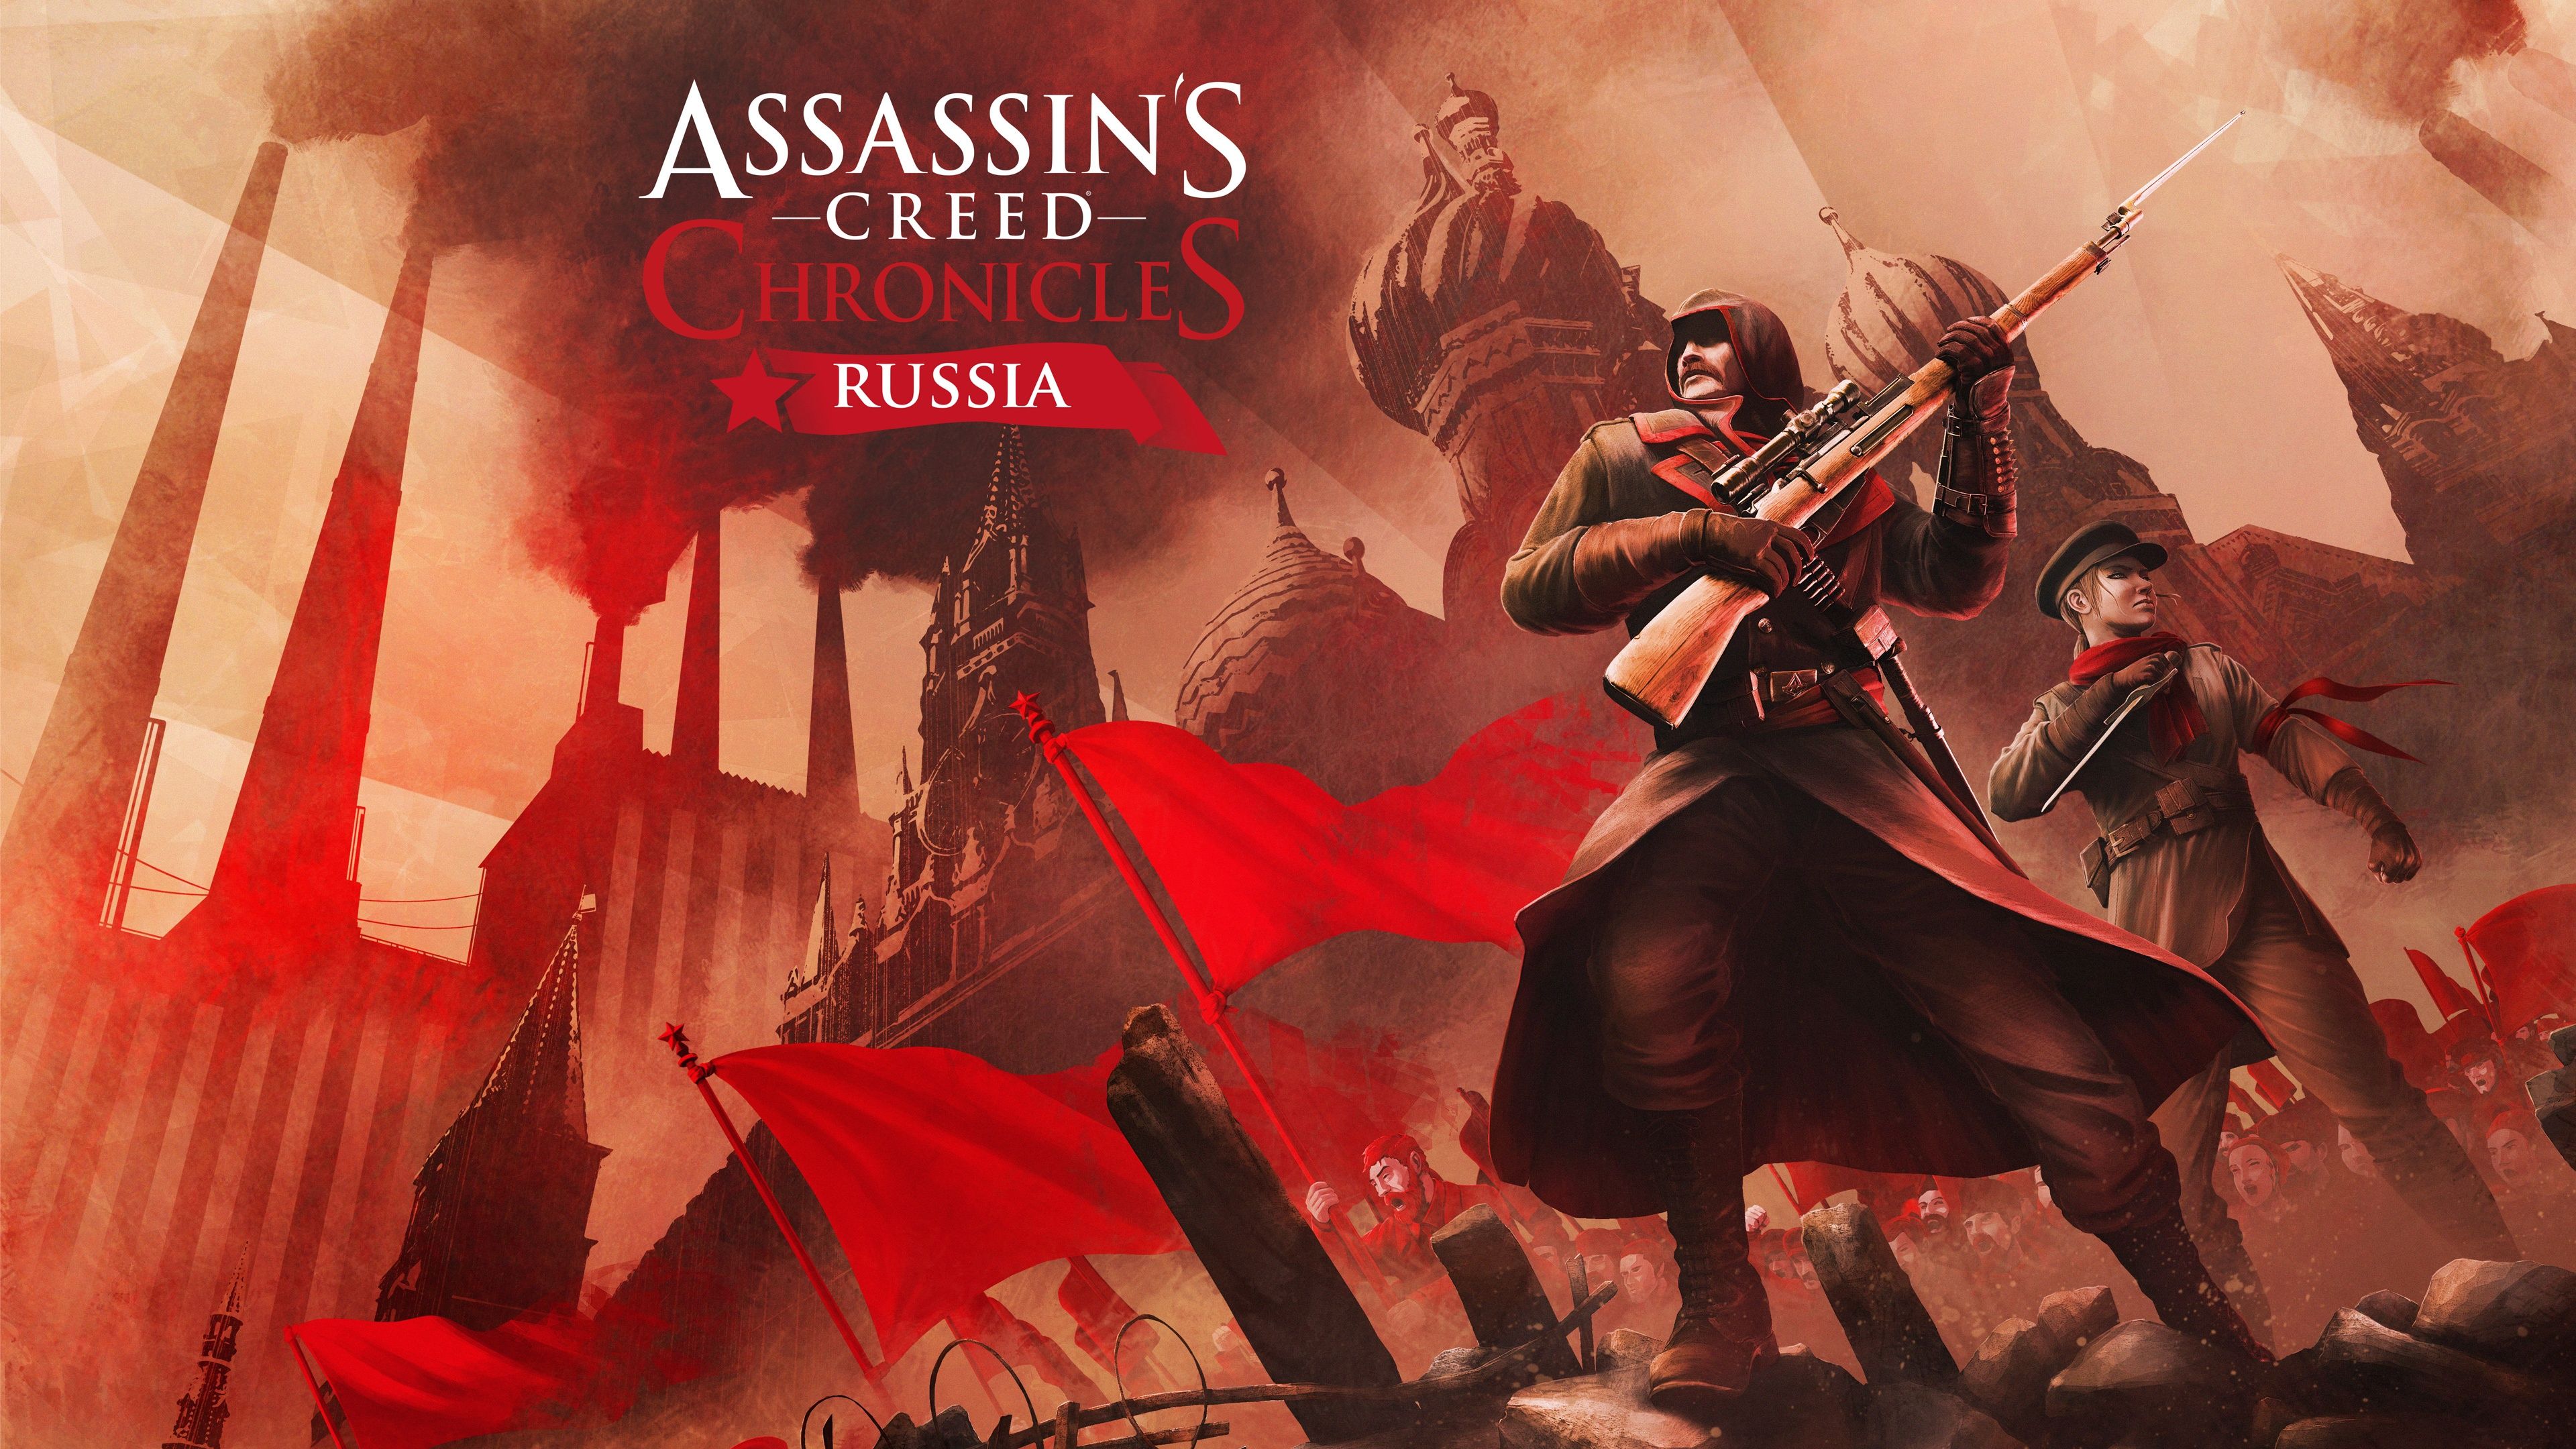 Assassin's Creed Chronicles Russia Wallpaper in jpg format for free